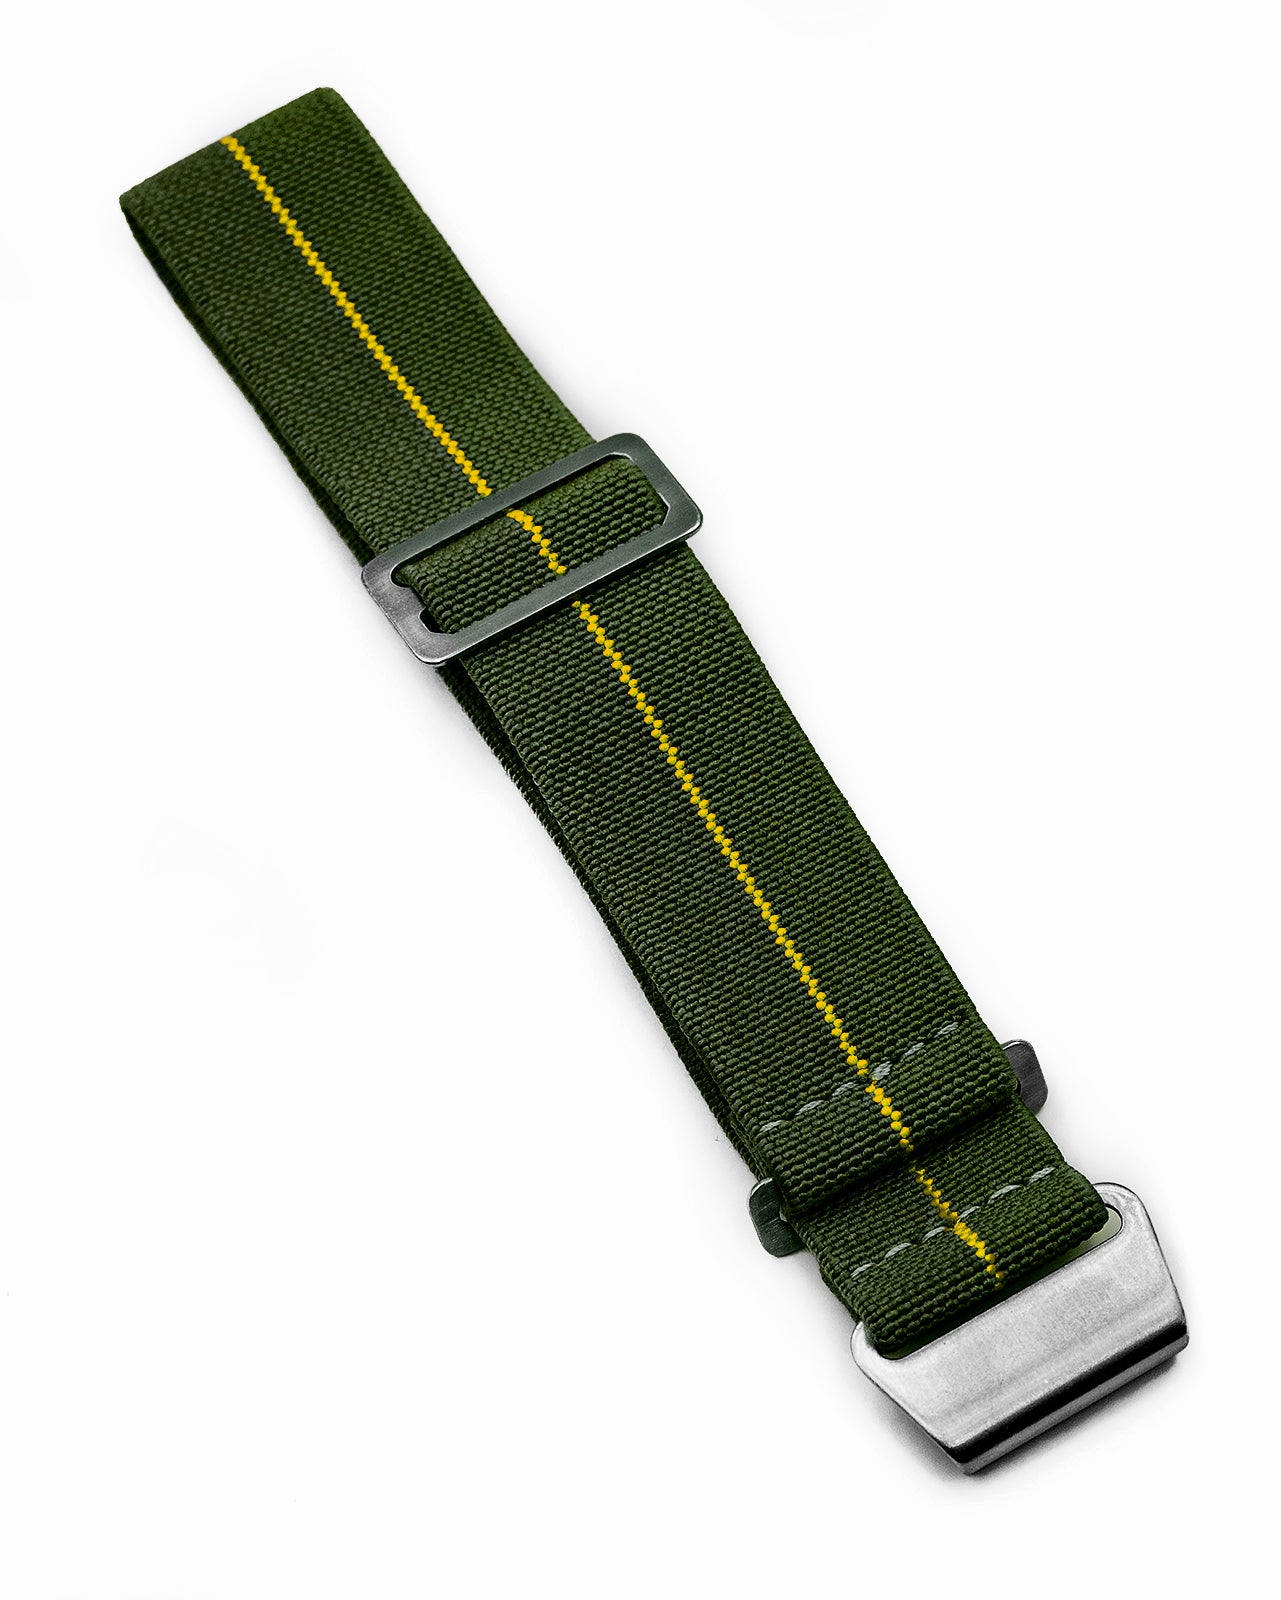 PARA Elastic - Olive Green with Yellow Centerline